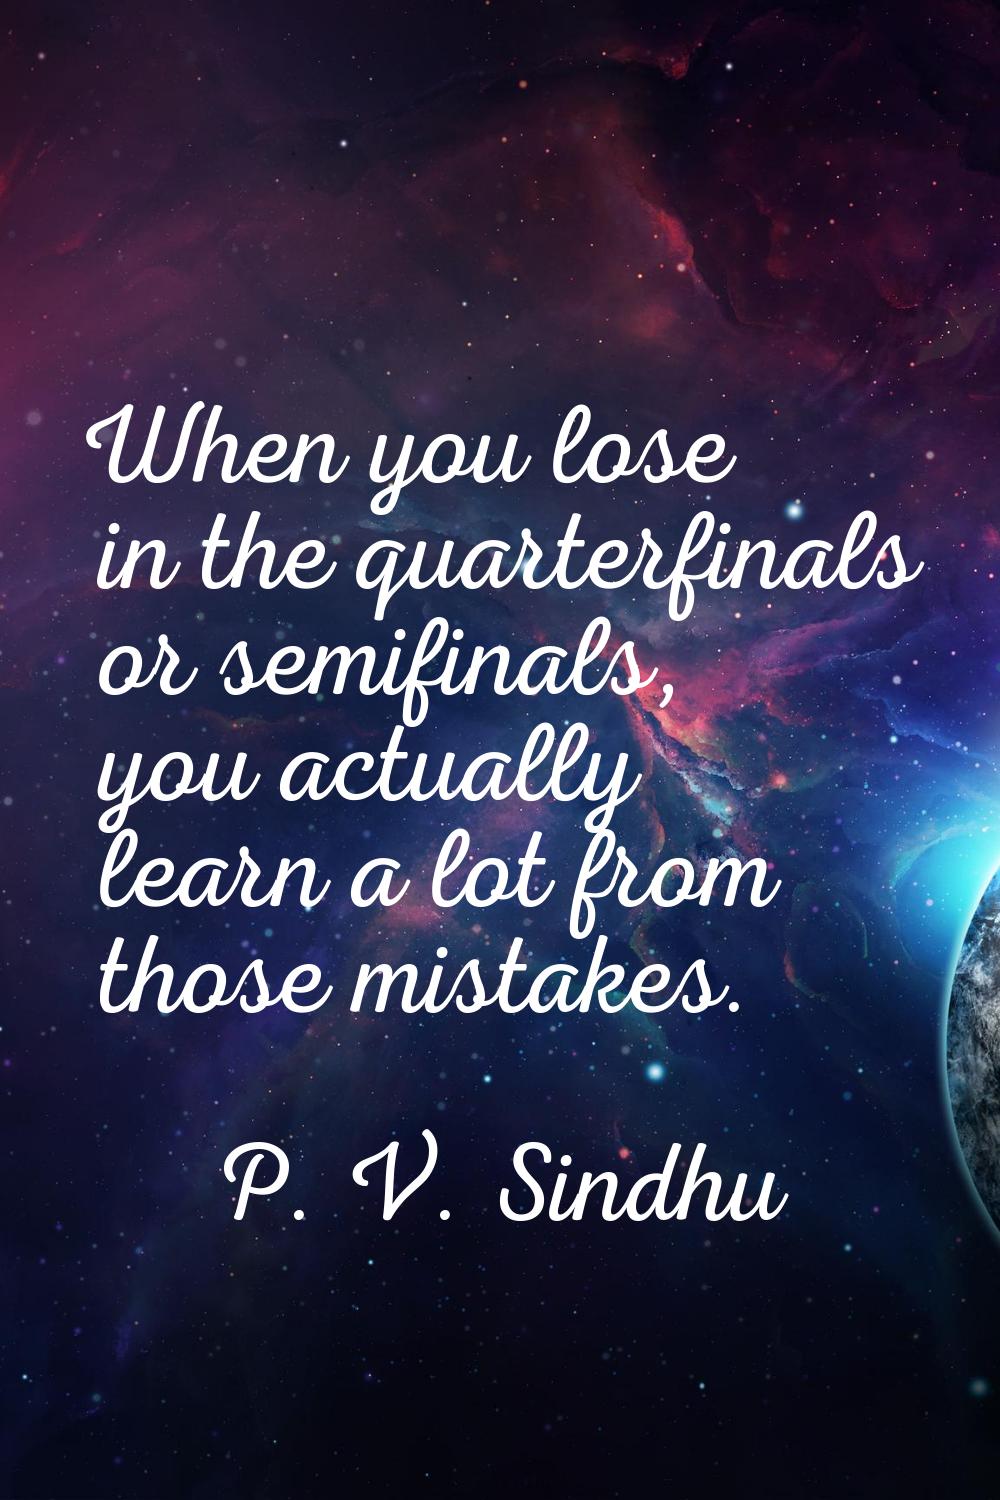 When you lose in the quarterfinals or semifinals, you actually learn a lot from those mistakes.